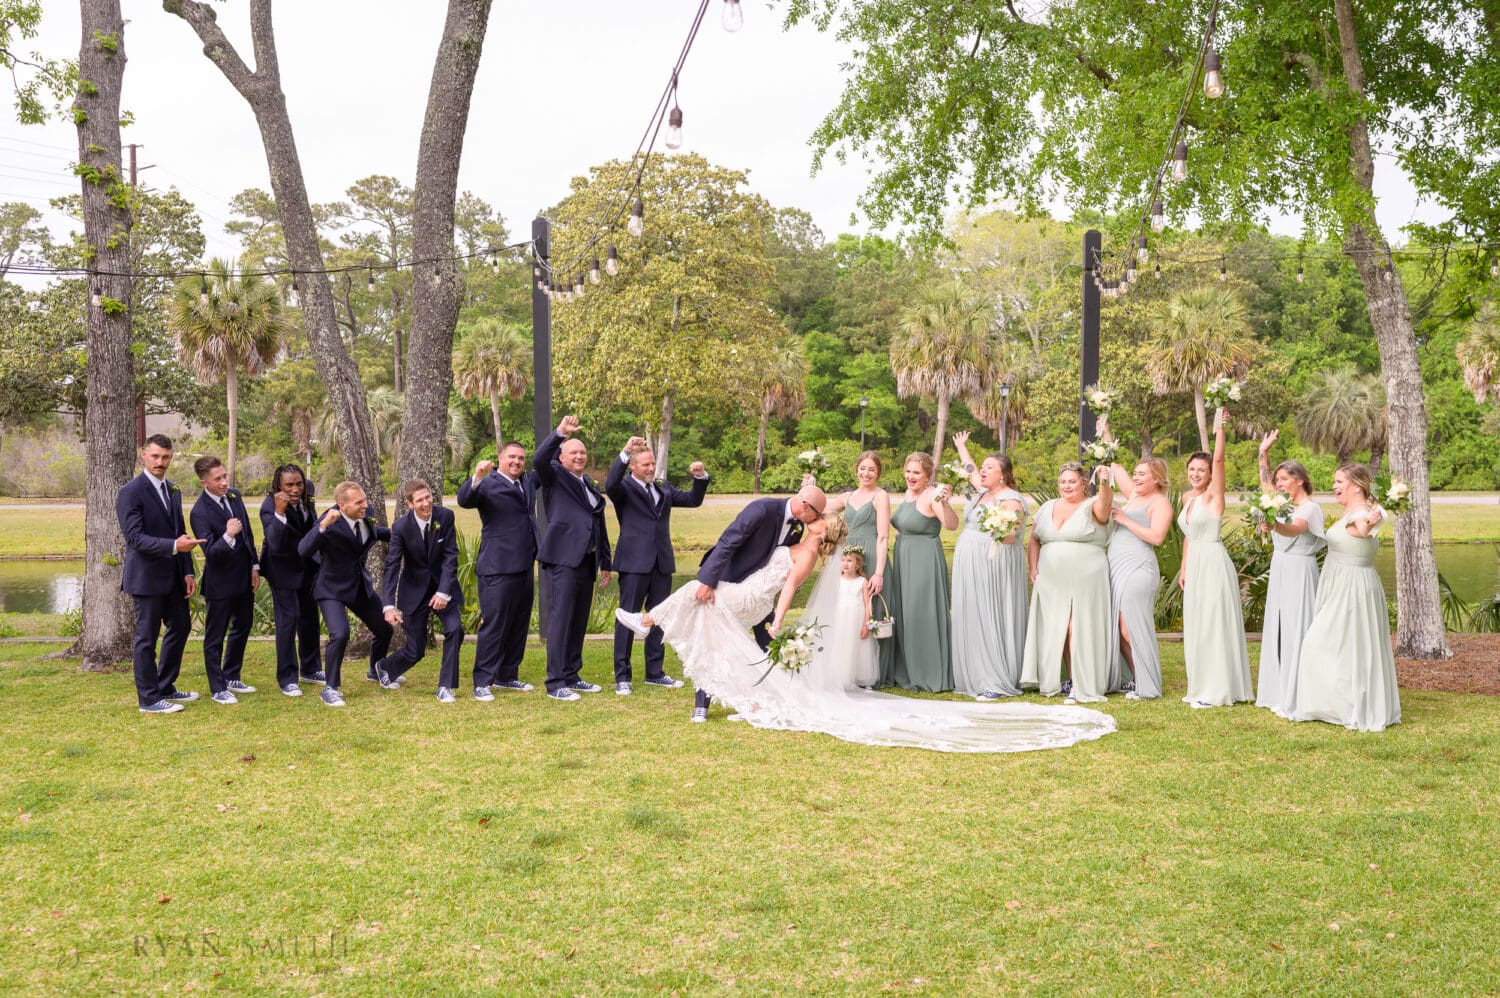 Kiss with the bridal party cheering - The Village House at Litchfield